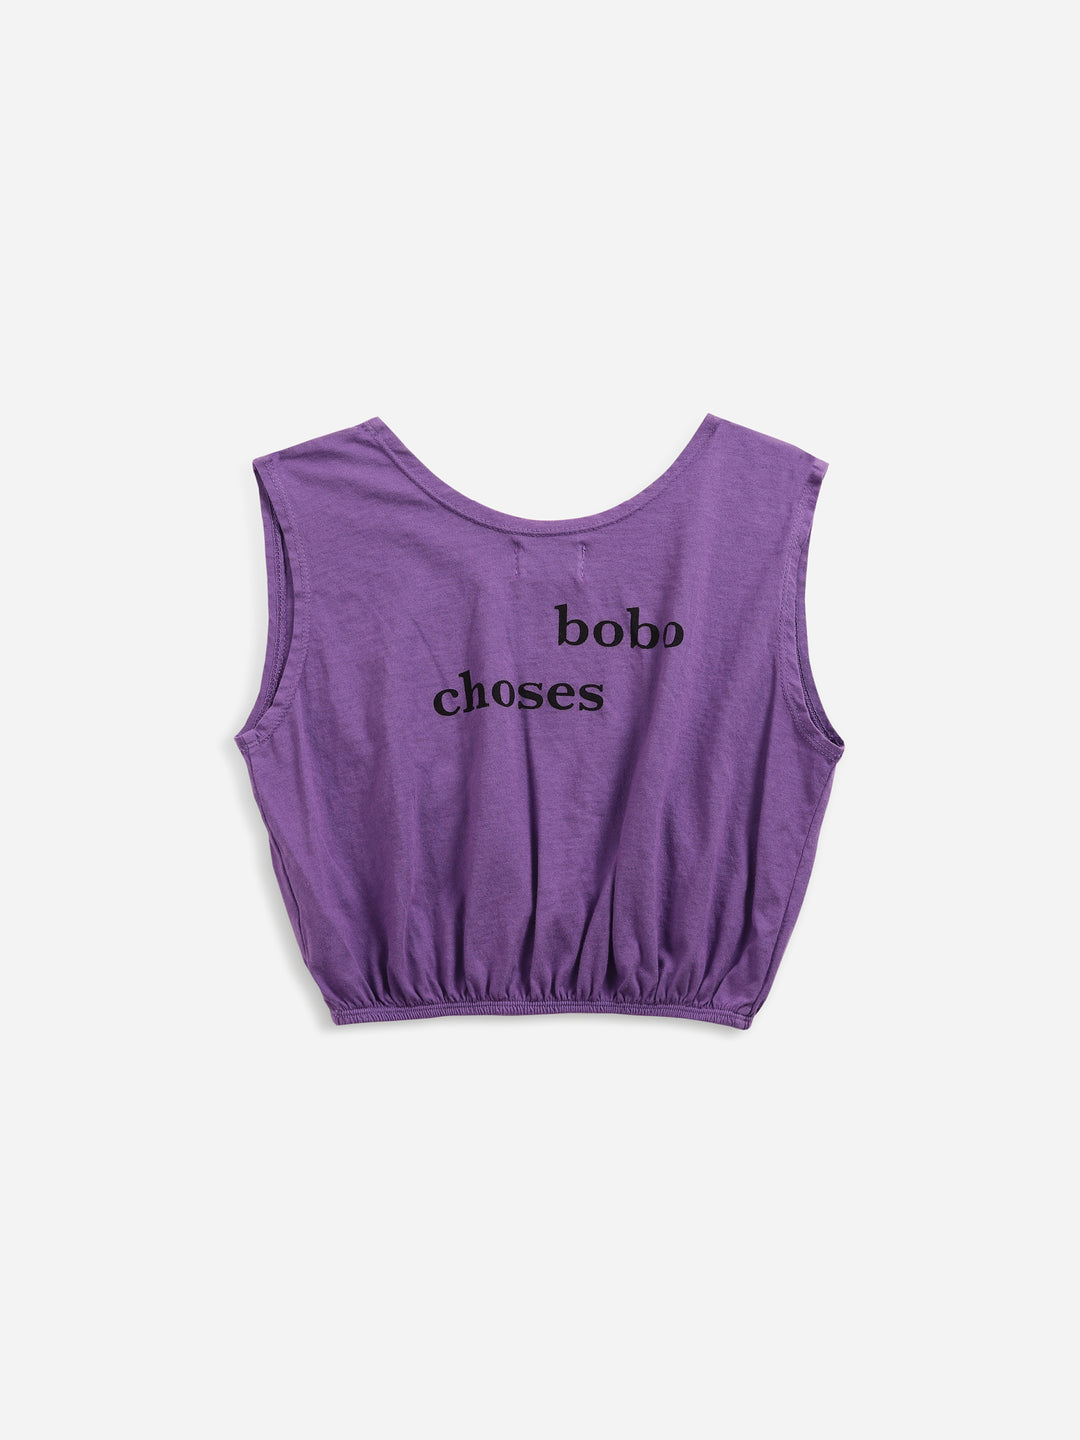 back of purple boxy tank top with graphic print ''Bobo Choses'' text